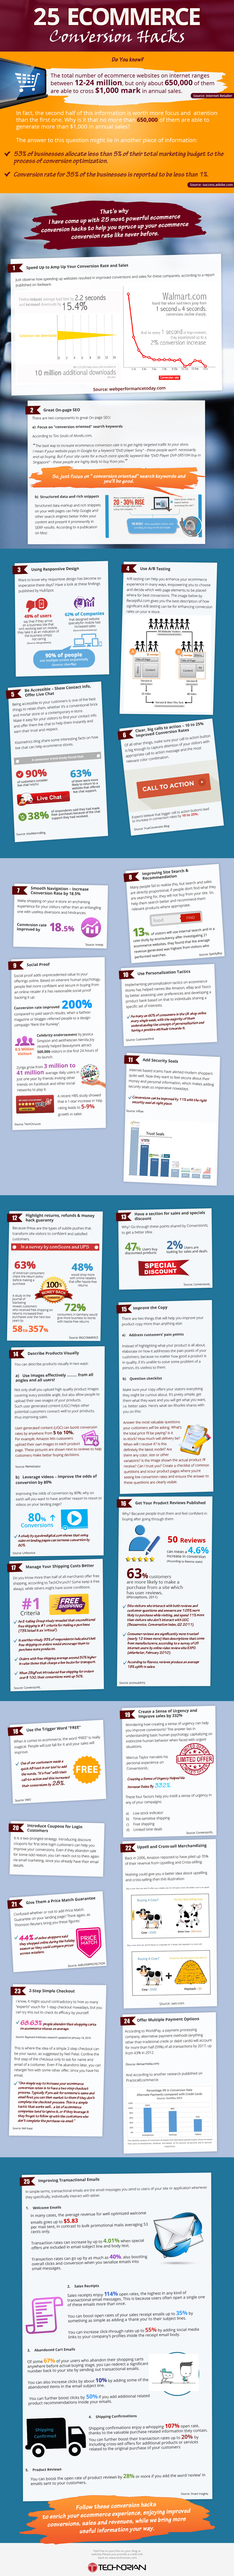 25 Ways to Improve Your Online Sales Process [Infographic]